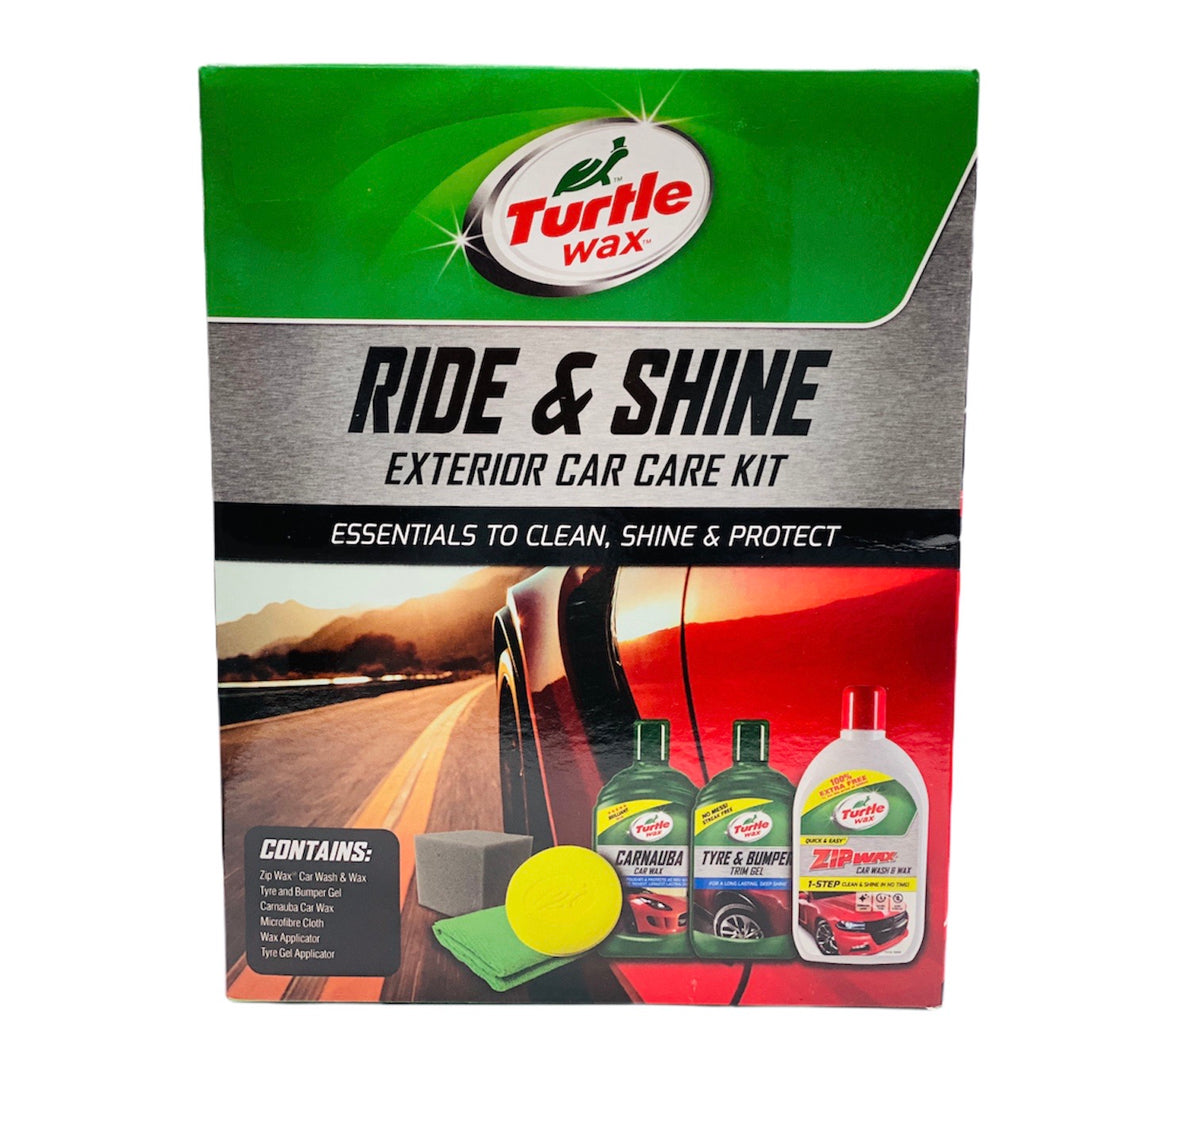 RIDE AND SHINE EXTERIOR CAR CARE KIT